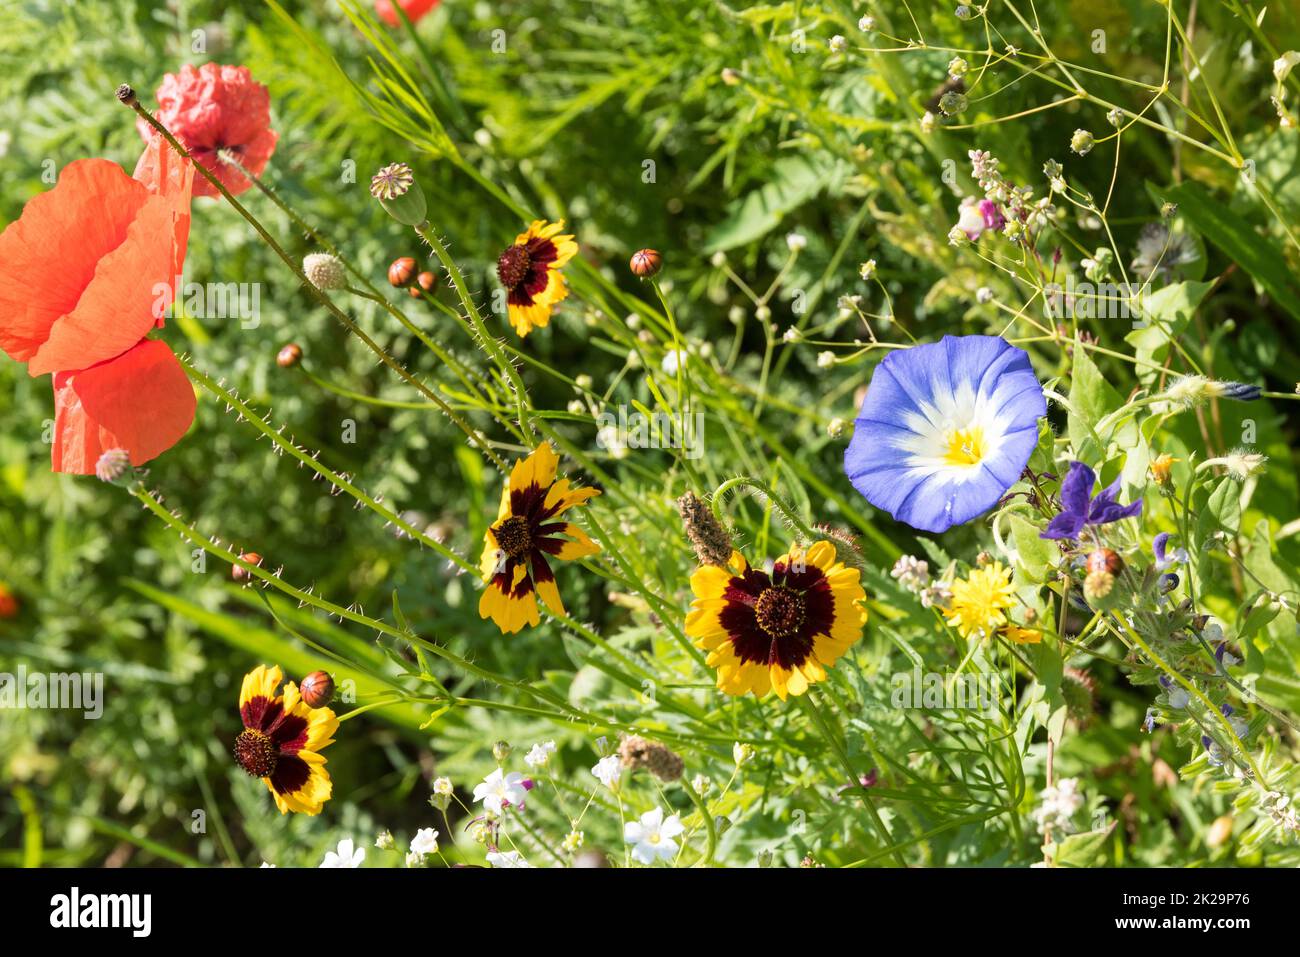 Poppy, blanket flower and blue morning glory - ornamental flowers and grasses in flower meadow - detail Stock Photo